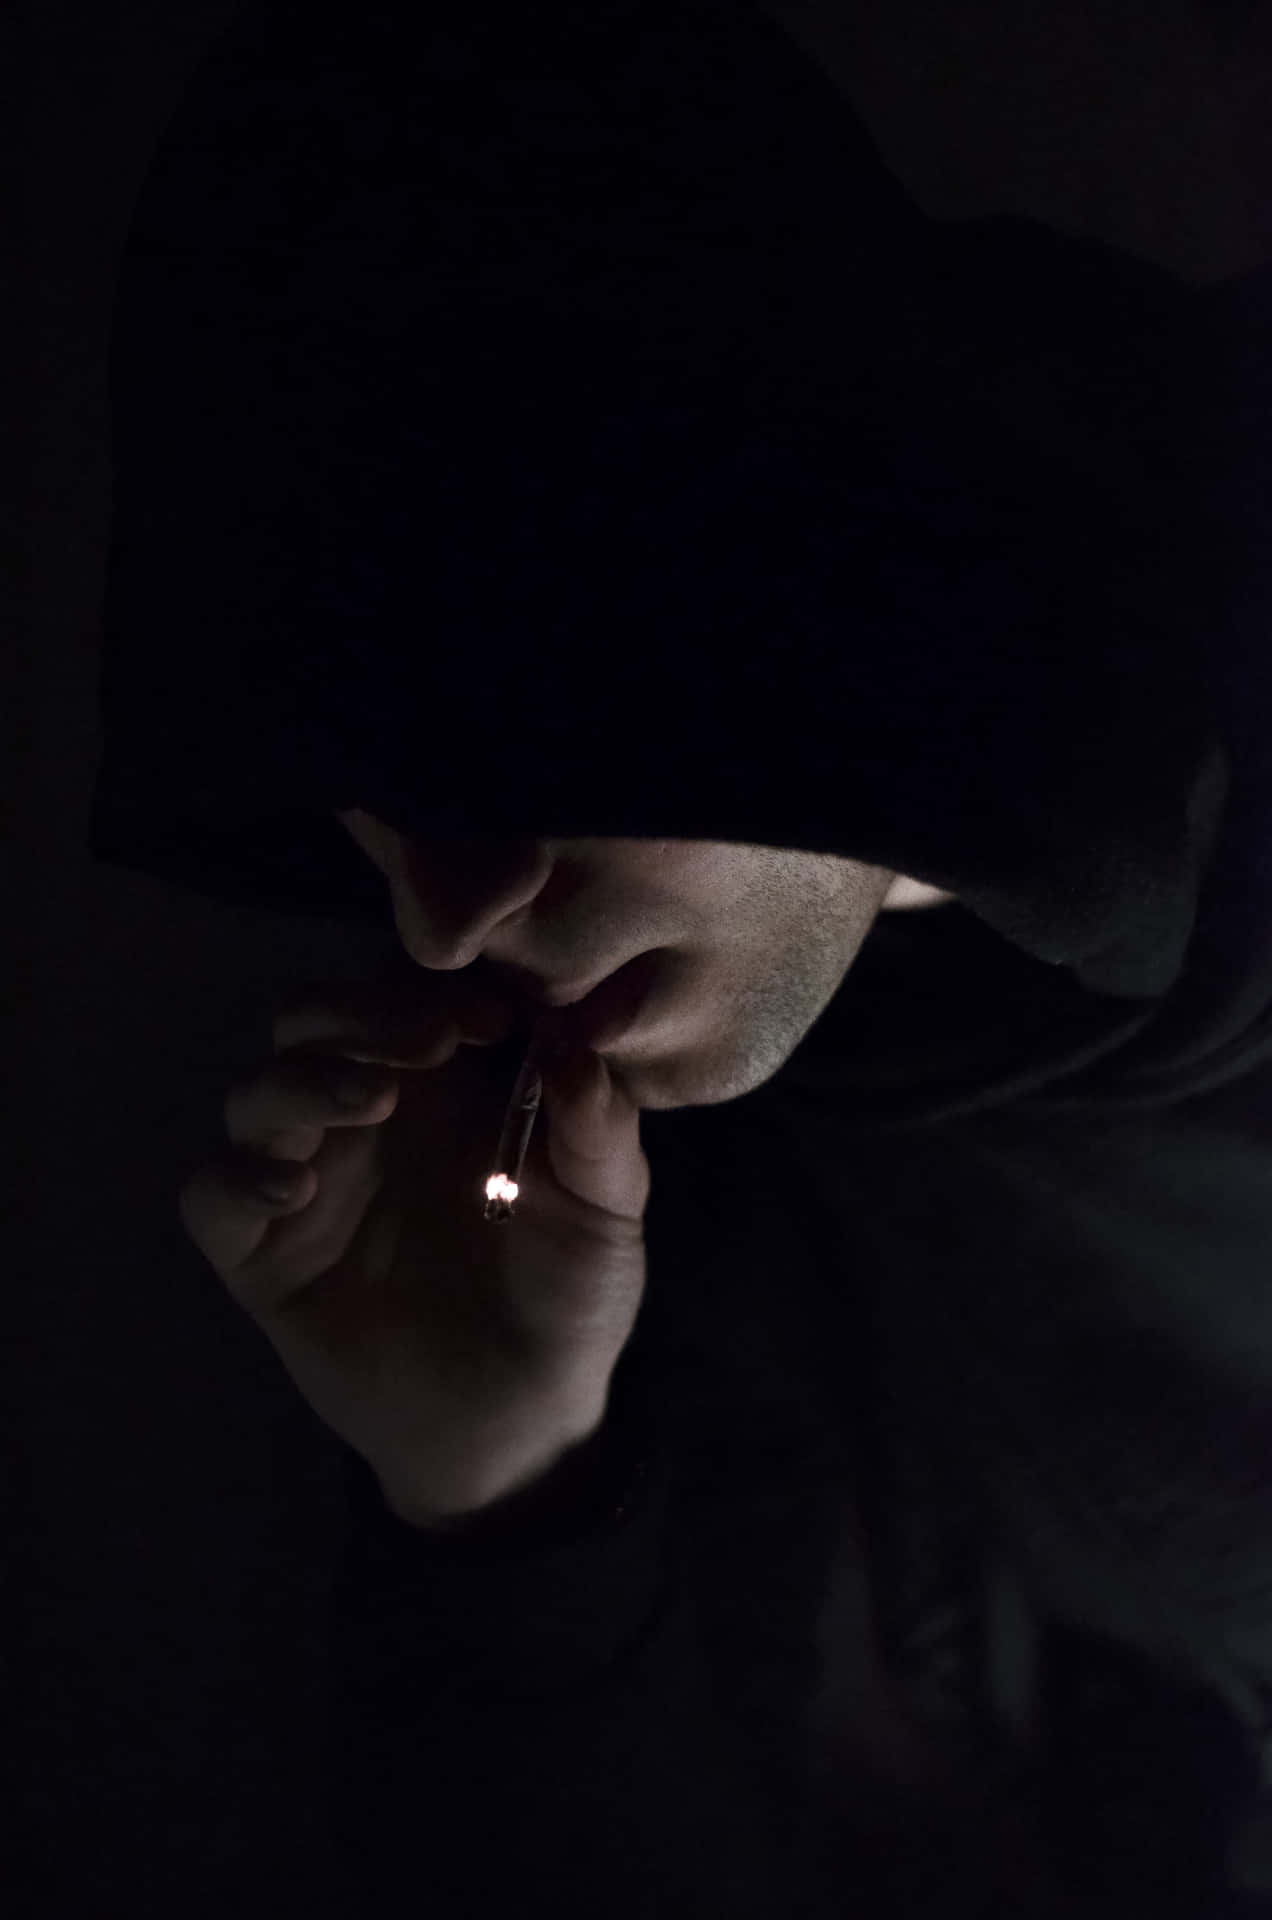 A Man In A Hoodie Smoking A Cigarette In The Dark